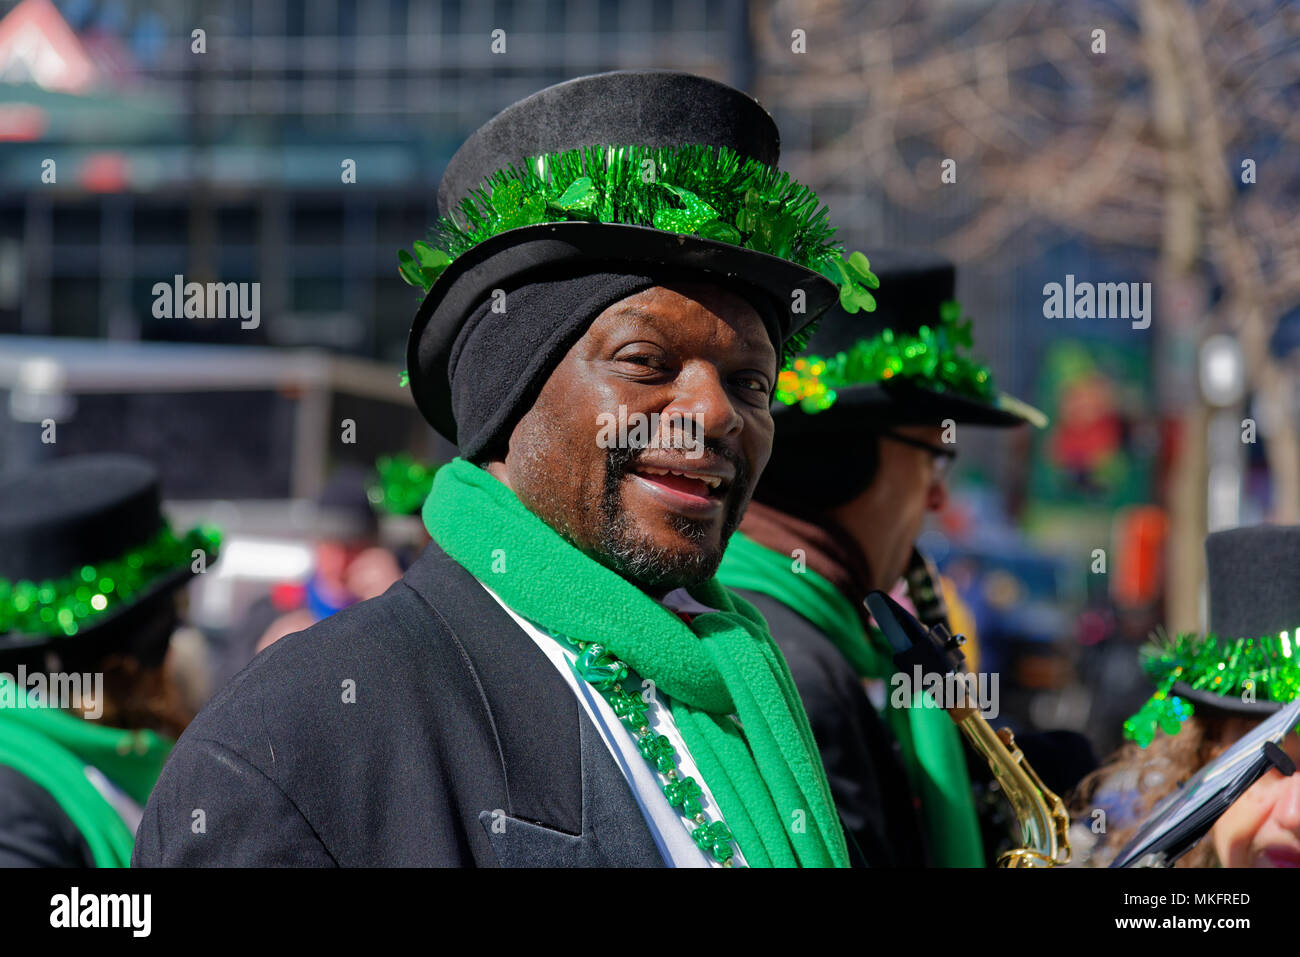 A black man wearing green in Montreal Saint Patrick's Day Parade Stock Photo